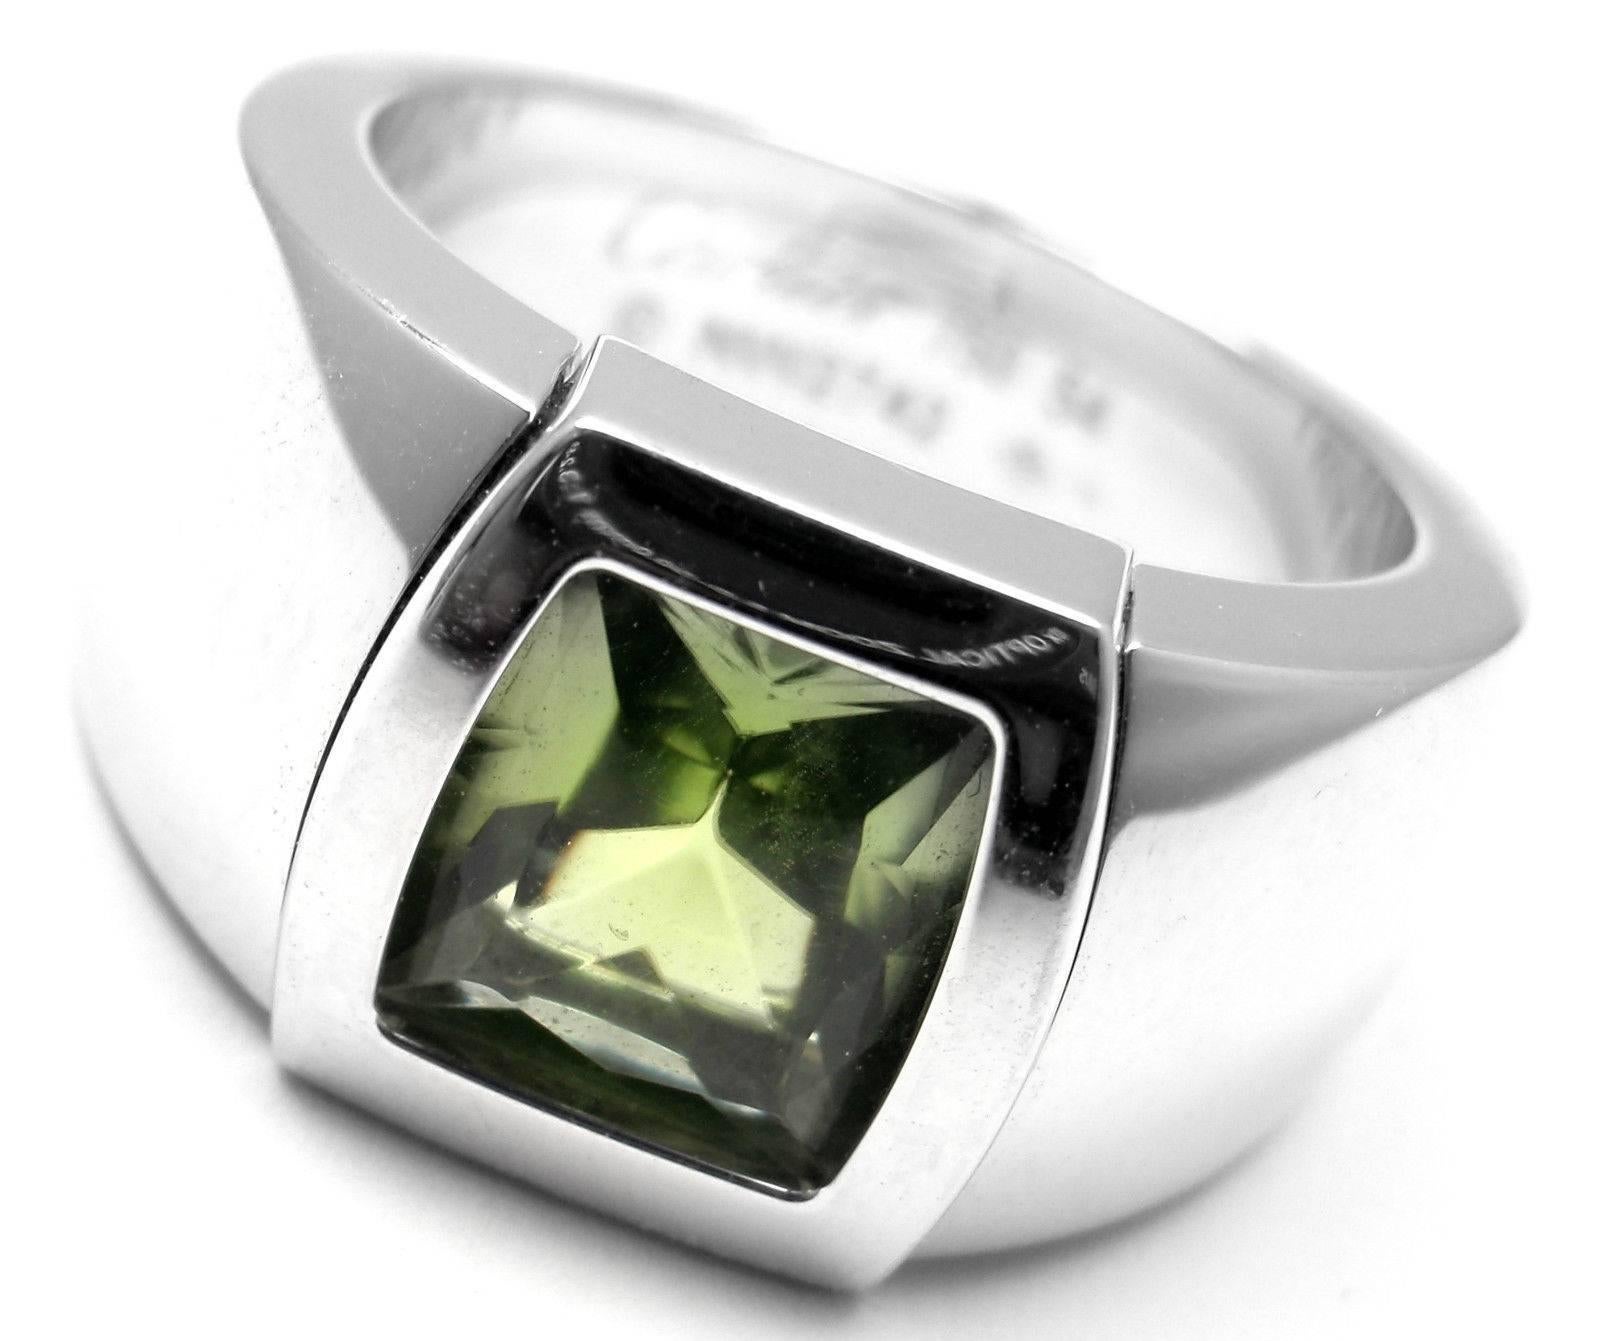 18k White Gold Peridot La Dona Ring by Cartier. 
With 1 large peridot stone: 9mm x 8mm. 
This ring comes with an original Cartier box and Cartier certificate.

Details: 
Ring Size: Europe 54, US 6 3/4
Weight: 21.5 grams
Width: 12mm
Stamped